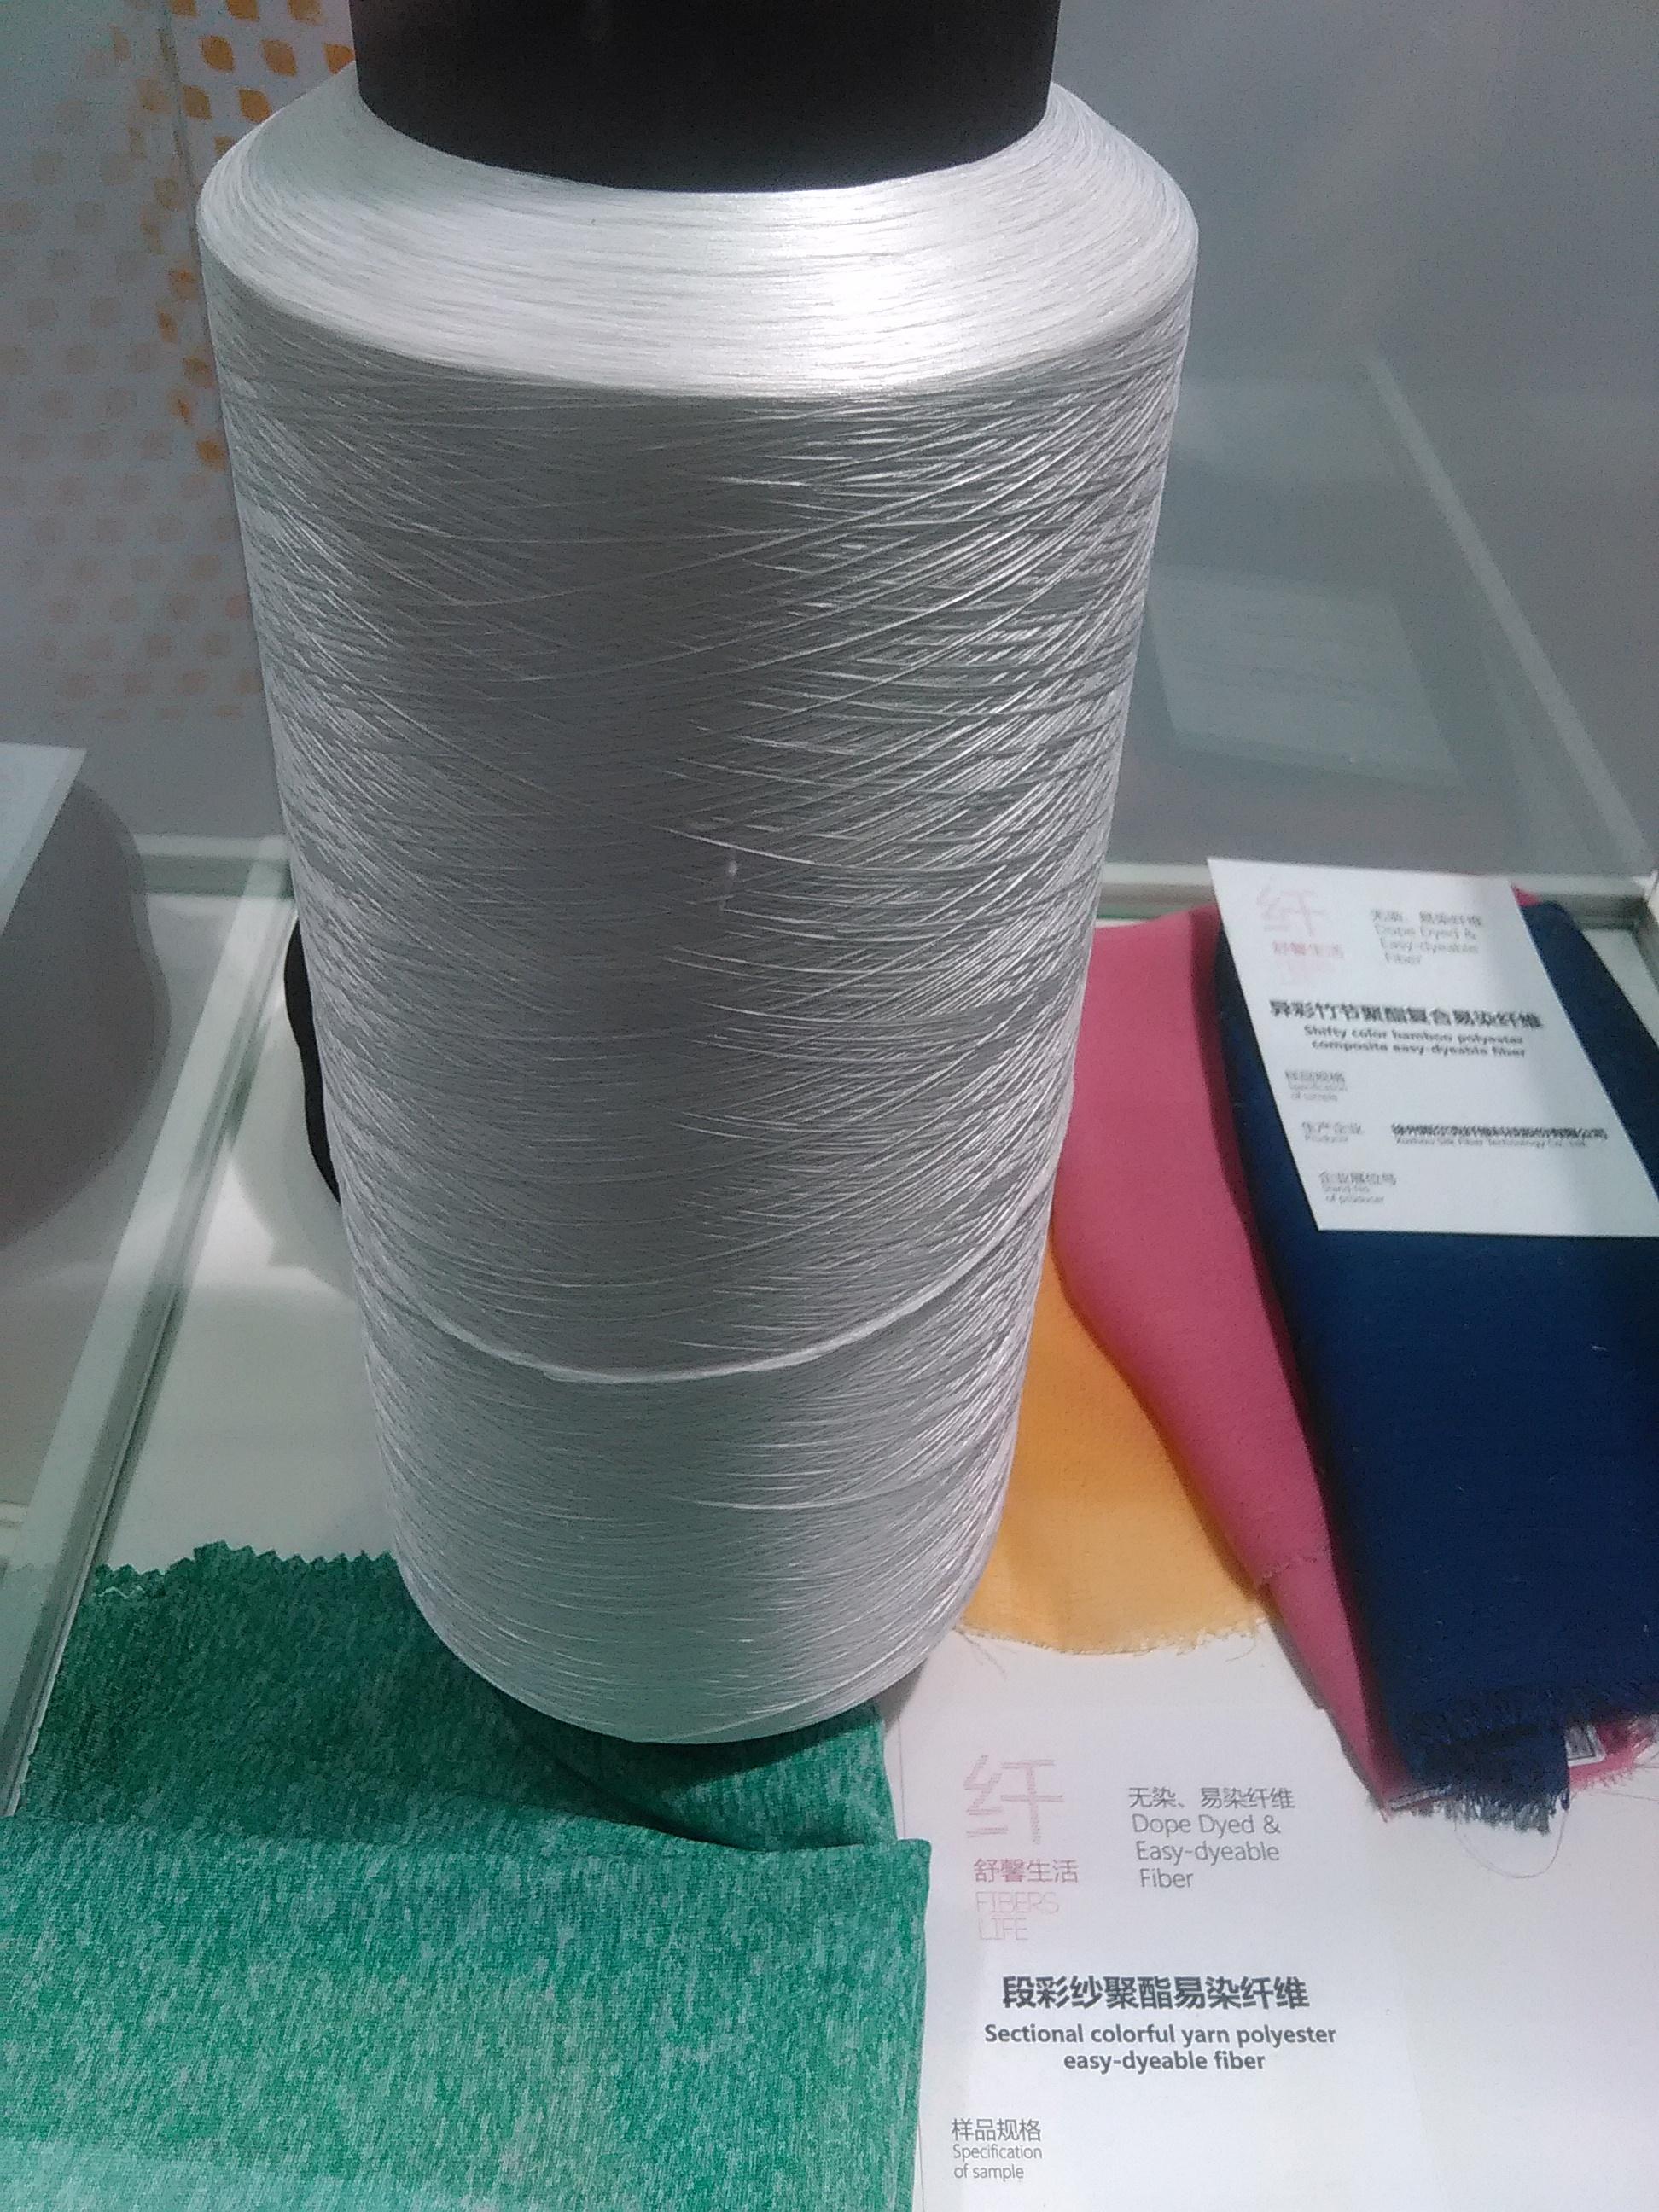 Cationic-dyeable  yarn